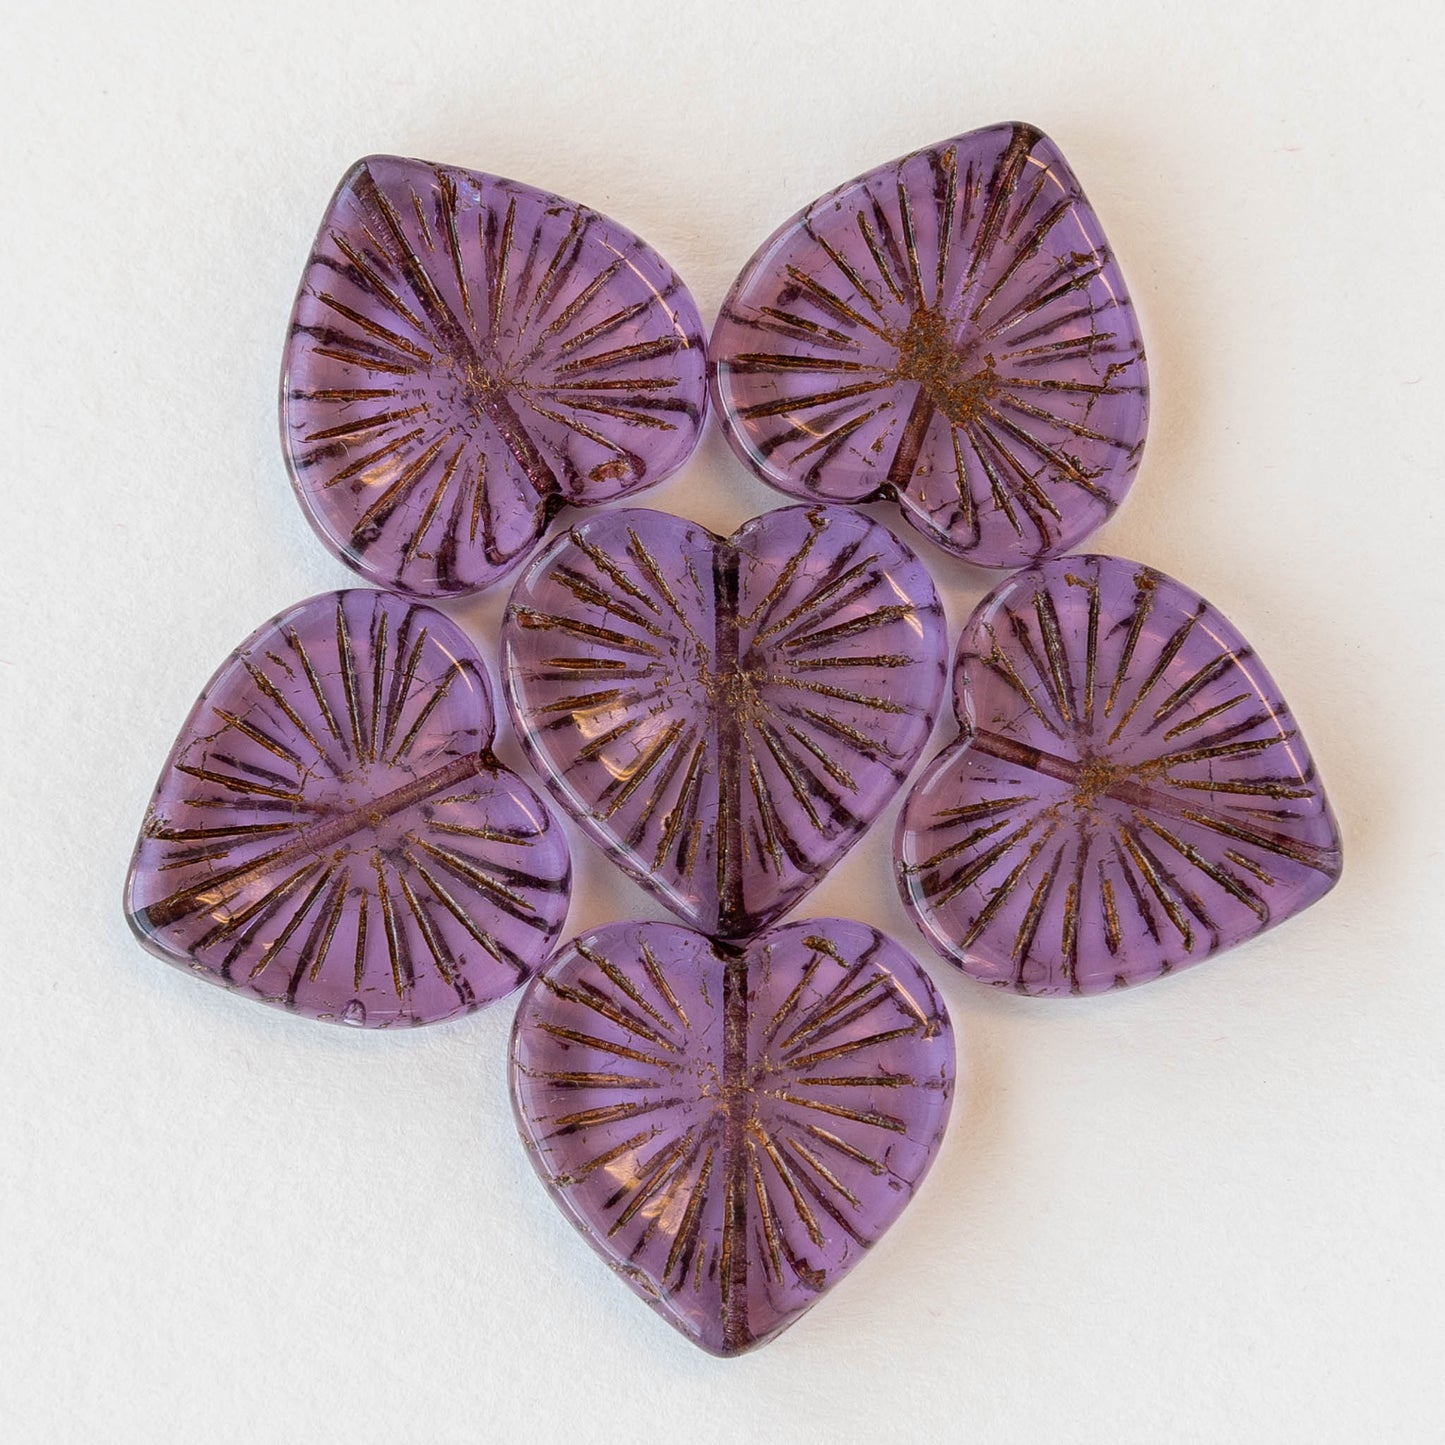 22mm Glass Heart Beads - Transparent Purple with a Bronze Wash - 4